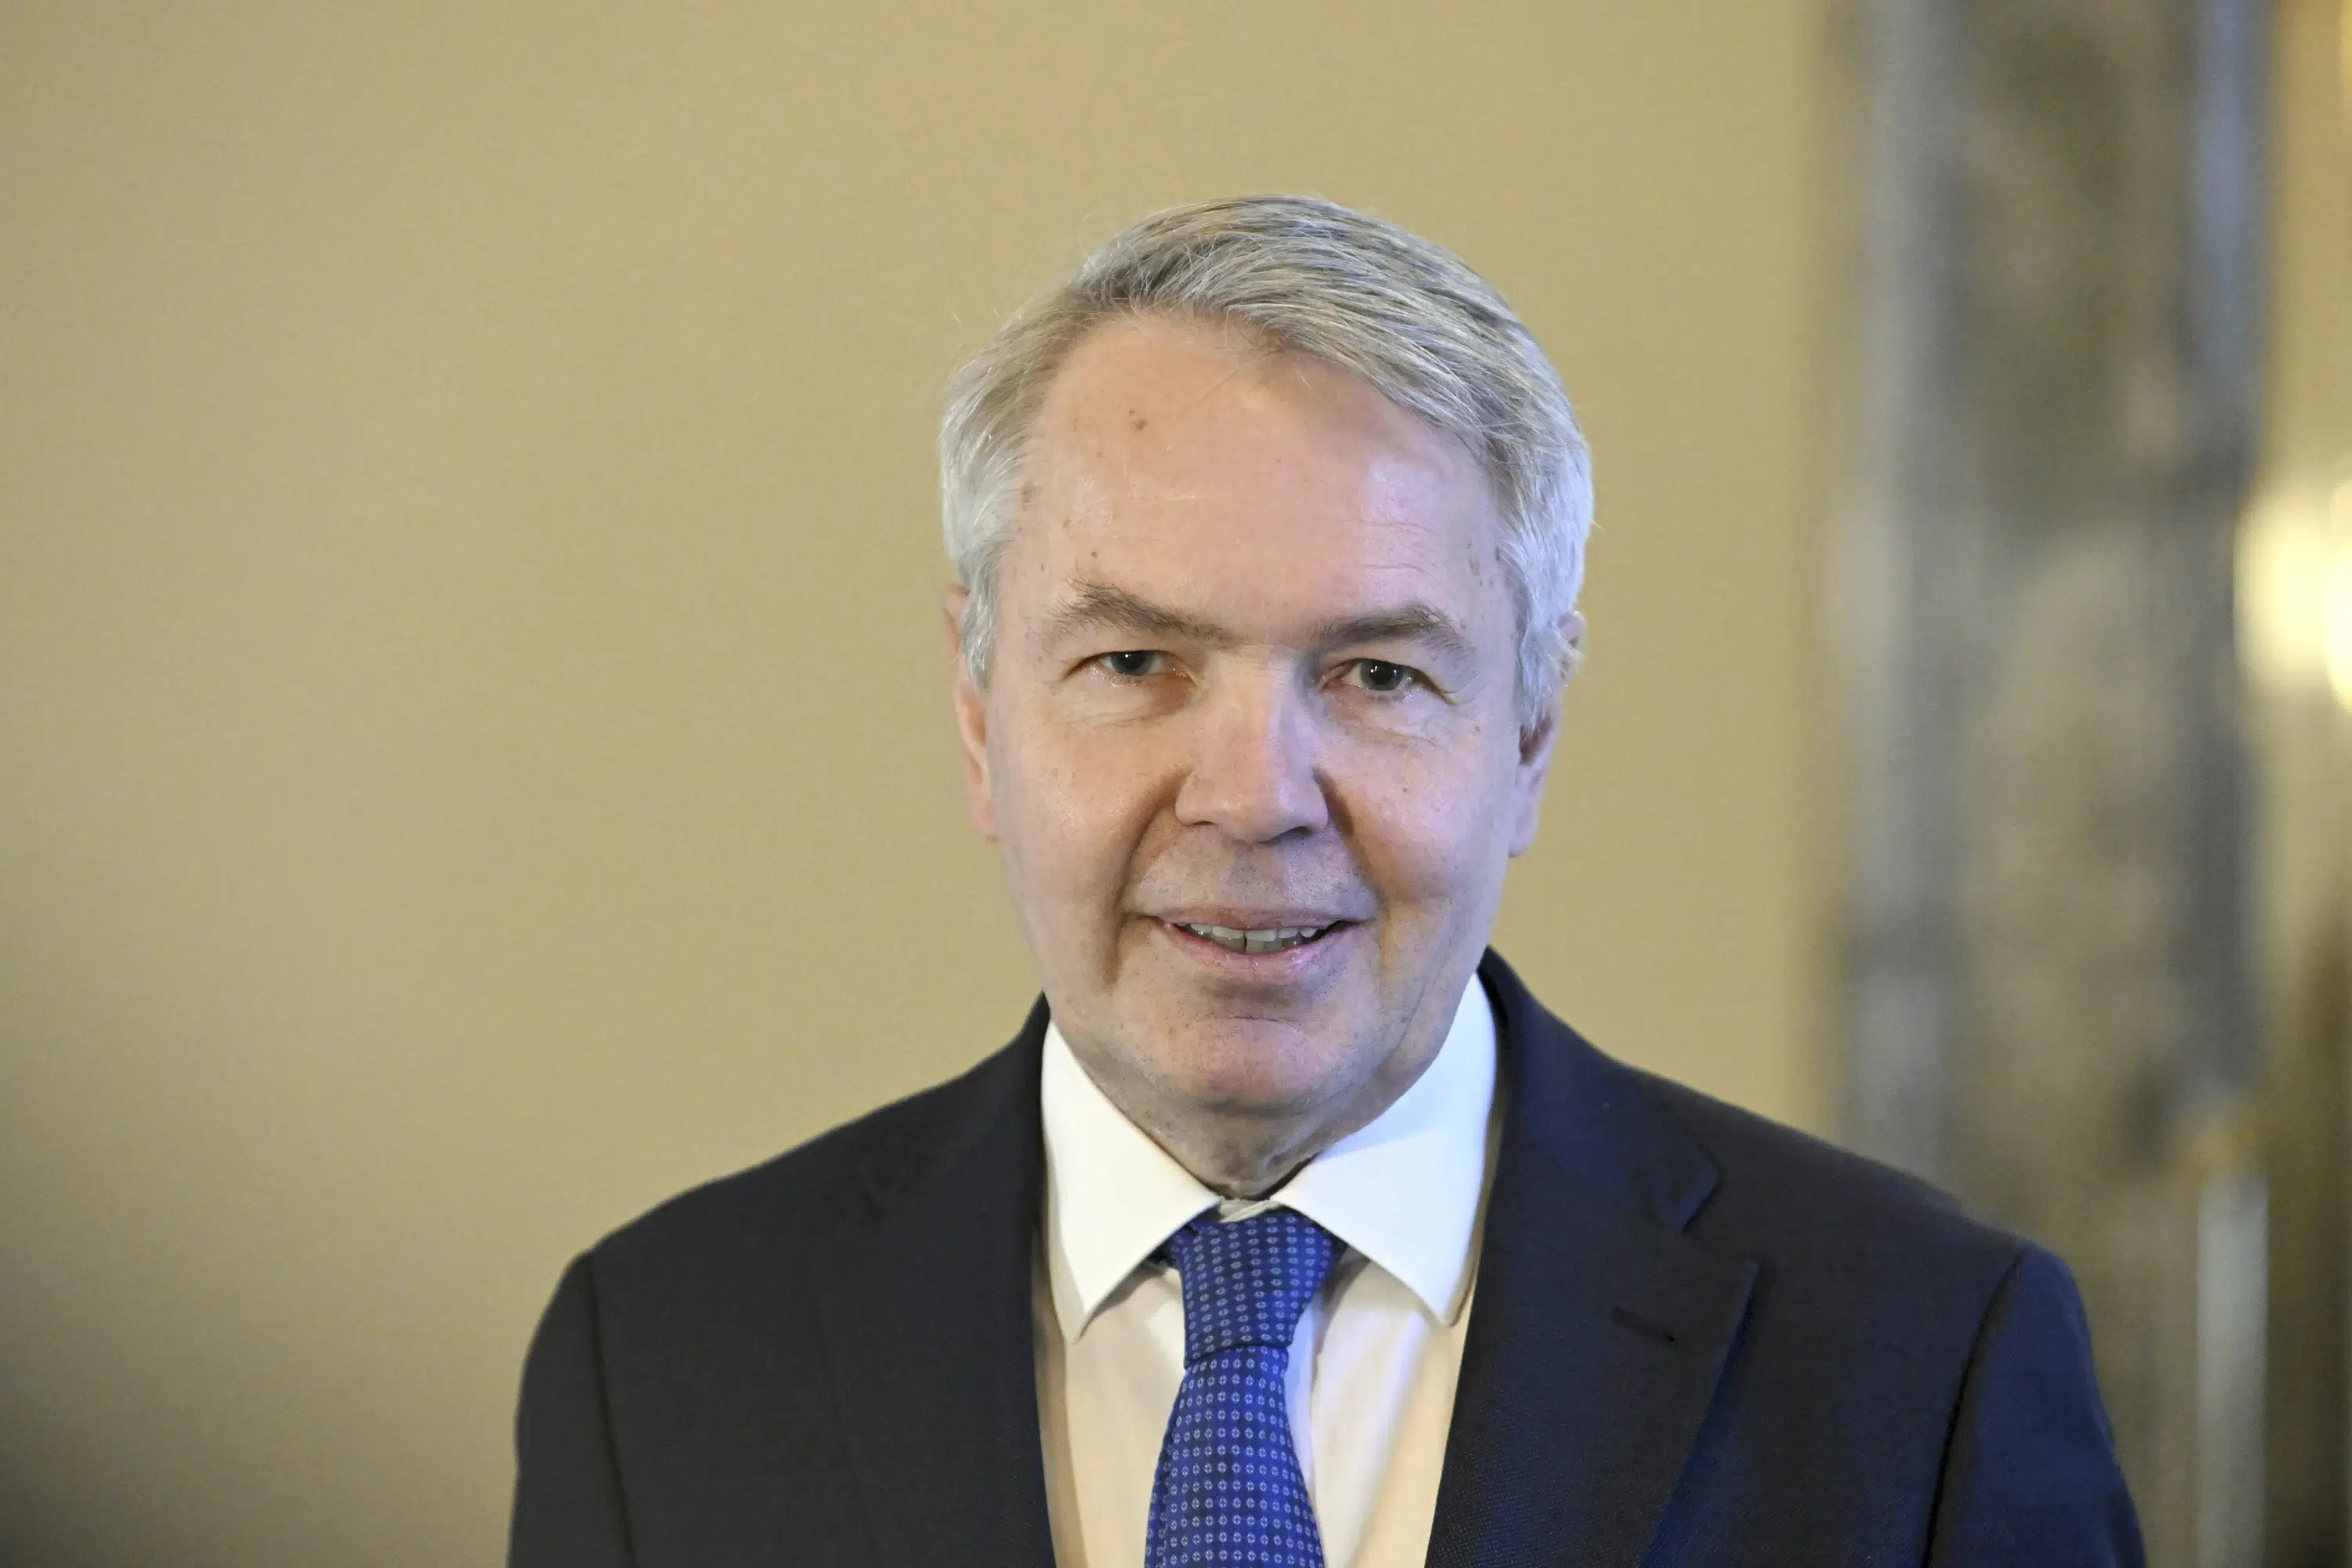 Finland's top diplomat hints at joining NATO without Sweden - The Associated Press